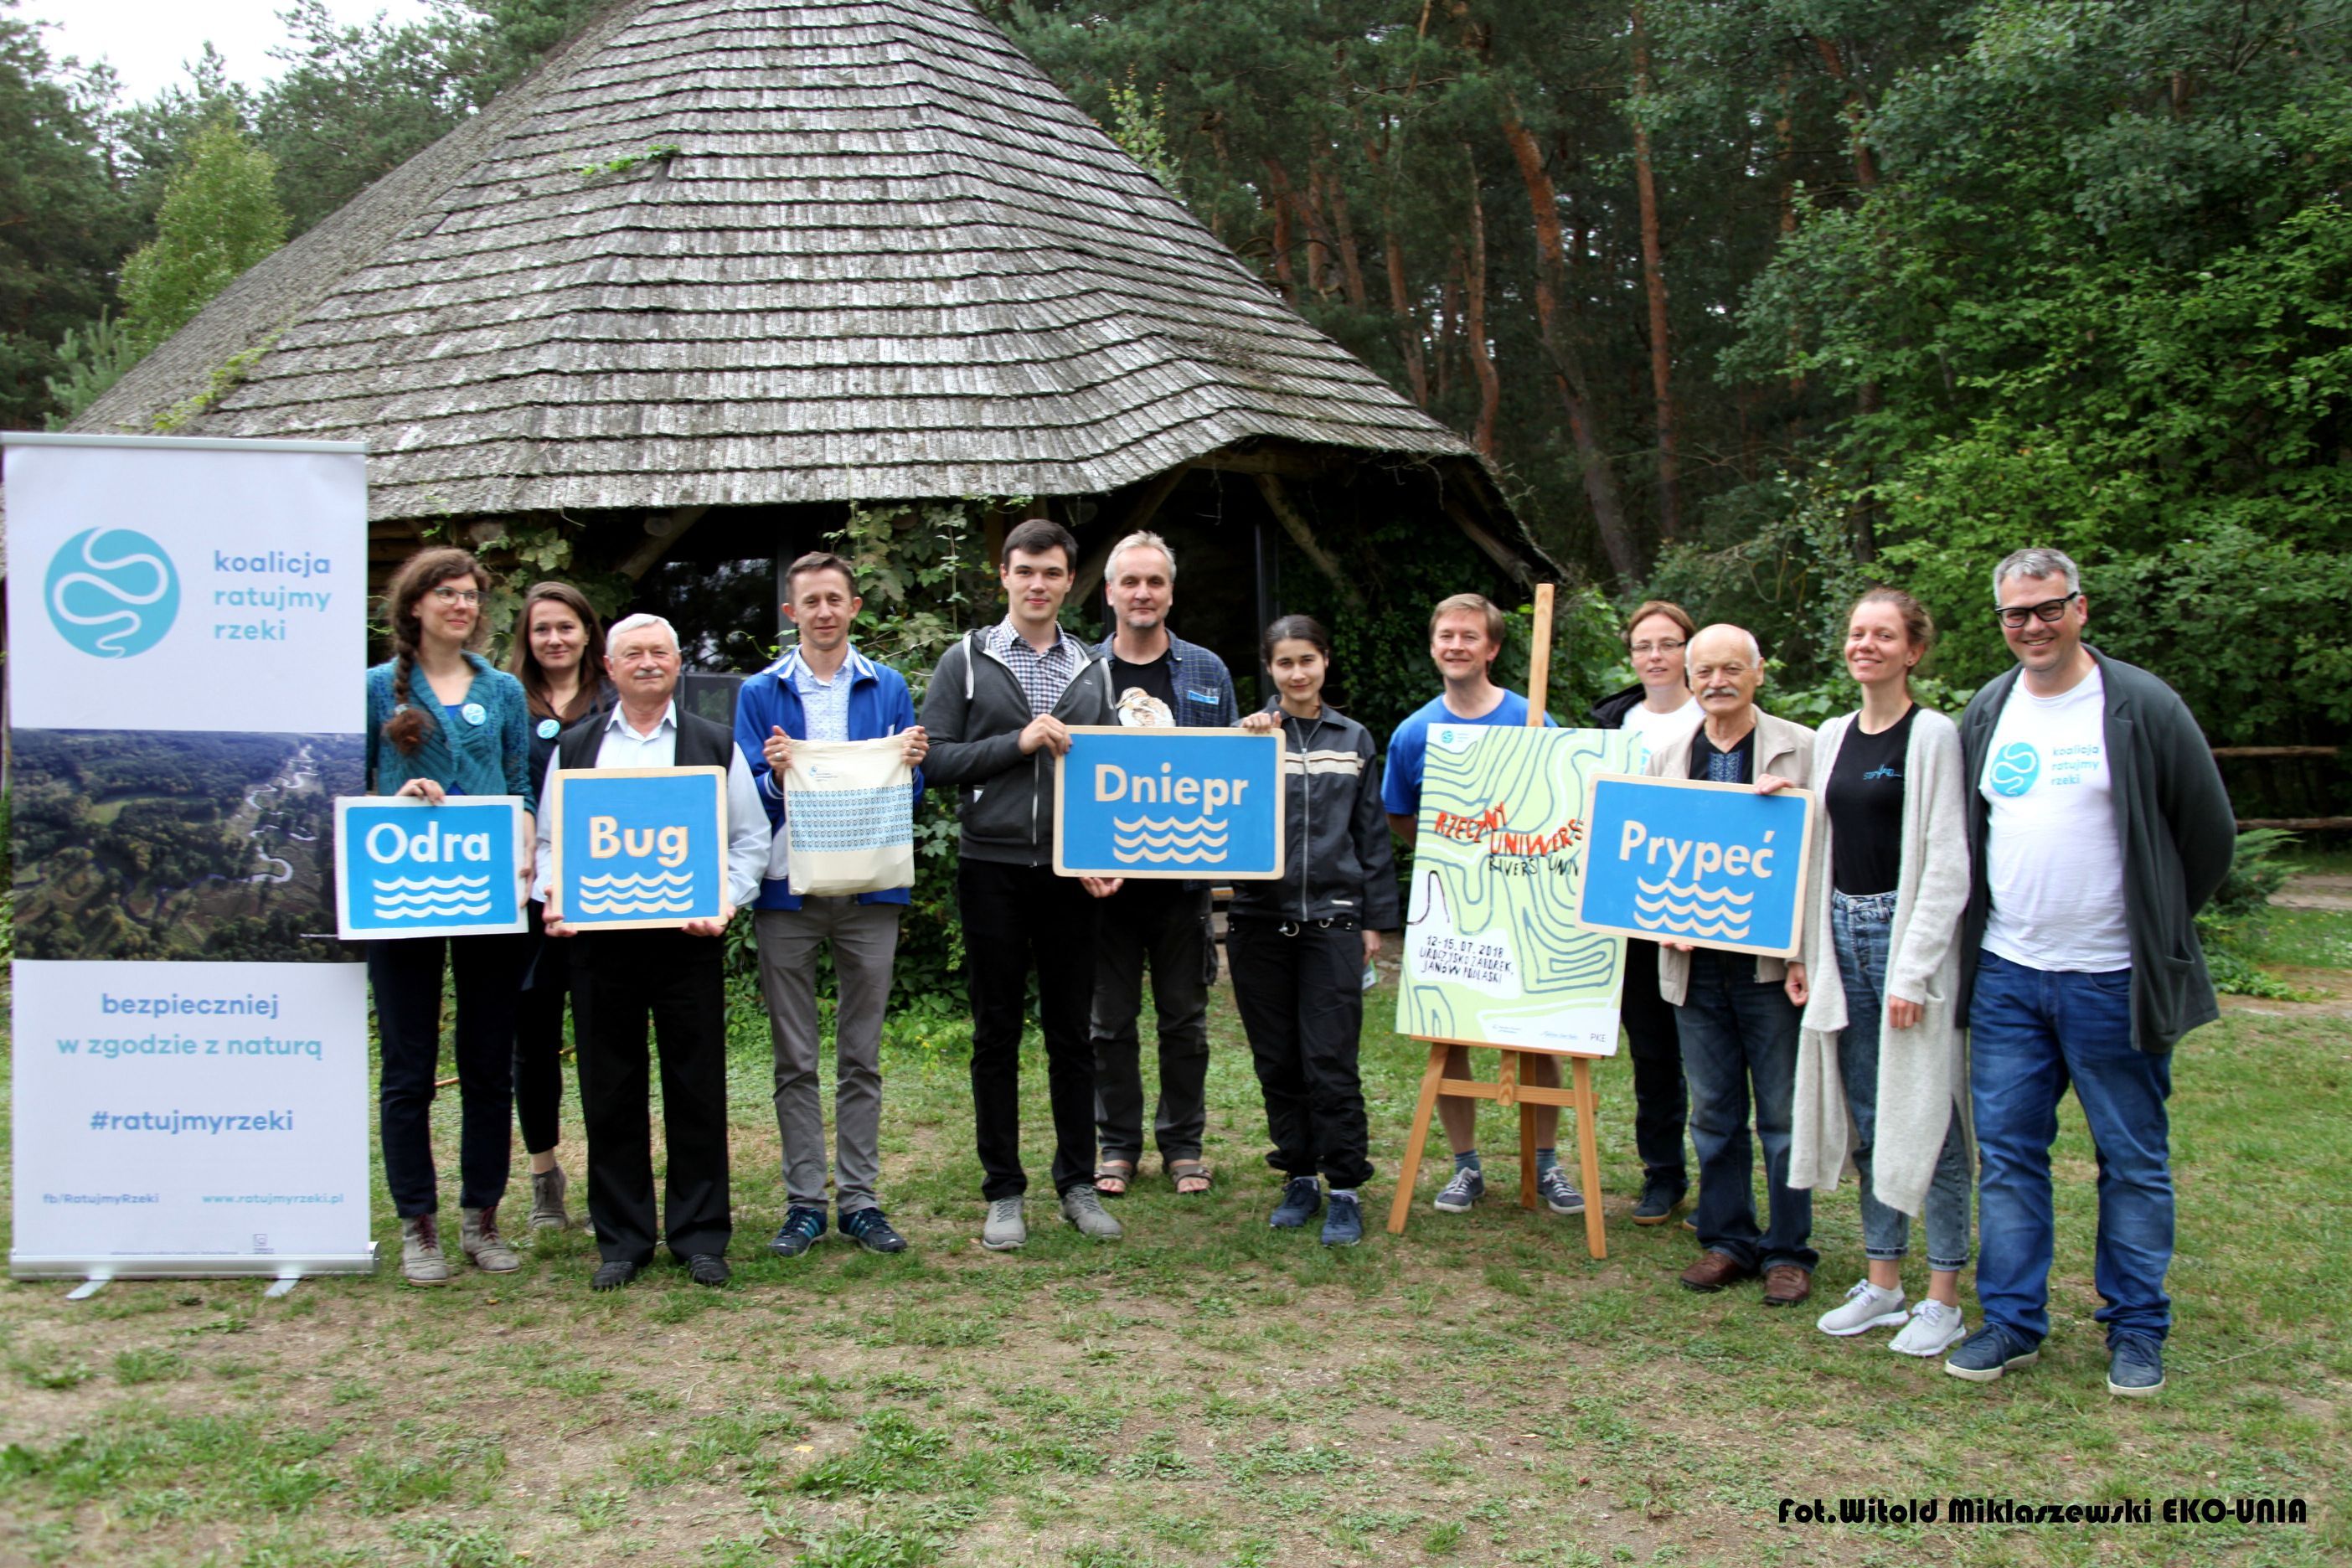 Bahna, Birdlife Belarus, CCB, KRR/Save the River Coalition at the 4th Green Summer Academy of Poland discussing plans of waterways in Eastern Europe and the preservation of freely flowing rivers